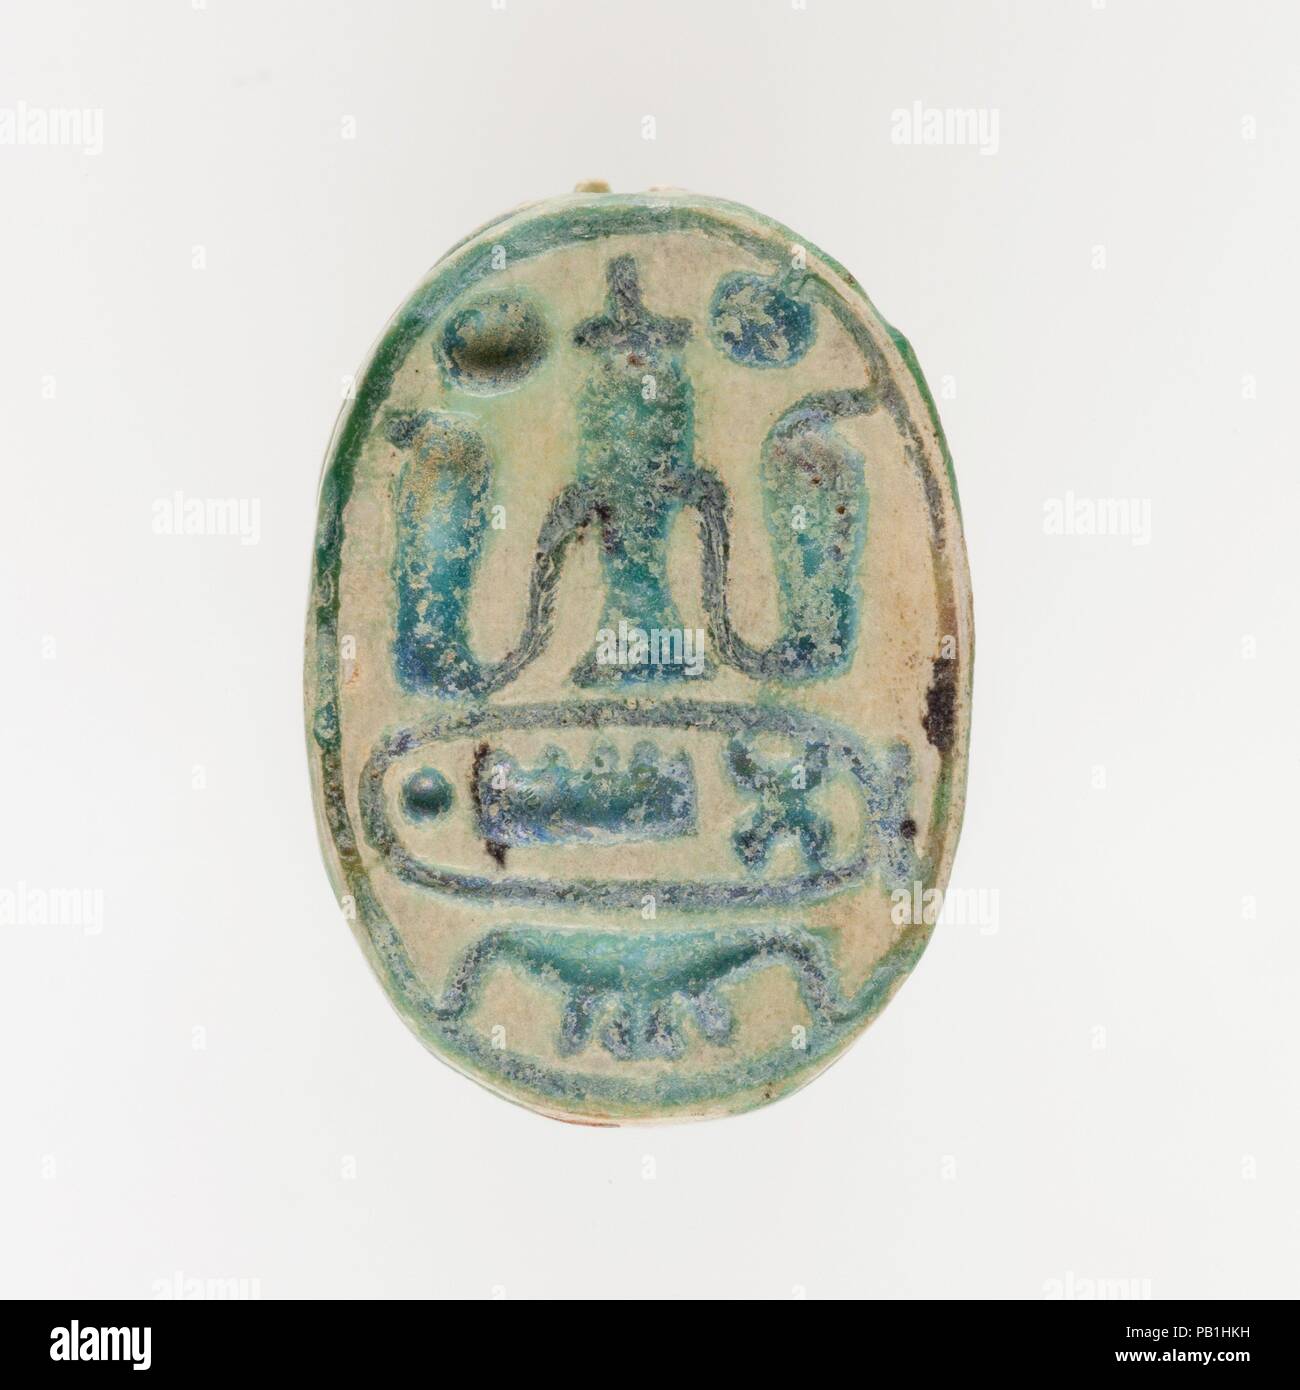 Scarab of Thutmose III. Dimensions: L. 1.7 × W. 1.2 × H. 0.9 cm (11/16 × 1/2 × 3/8 in.). Dynasty: Dynasty 18. Date: ca. 1550-1295 B.C.. Museum: Metropolitan Museum of Art, New York, USA. Stock Photo